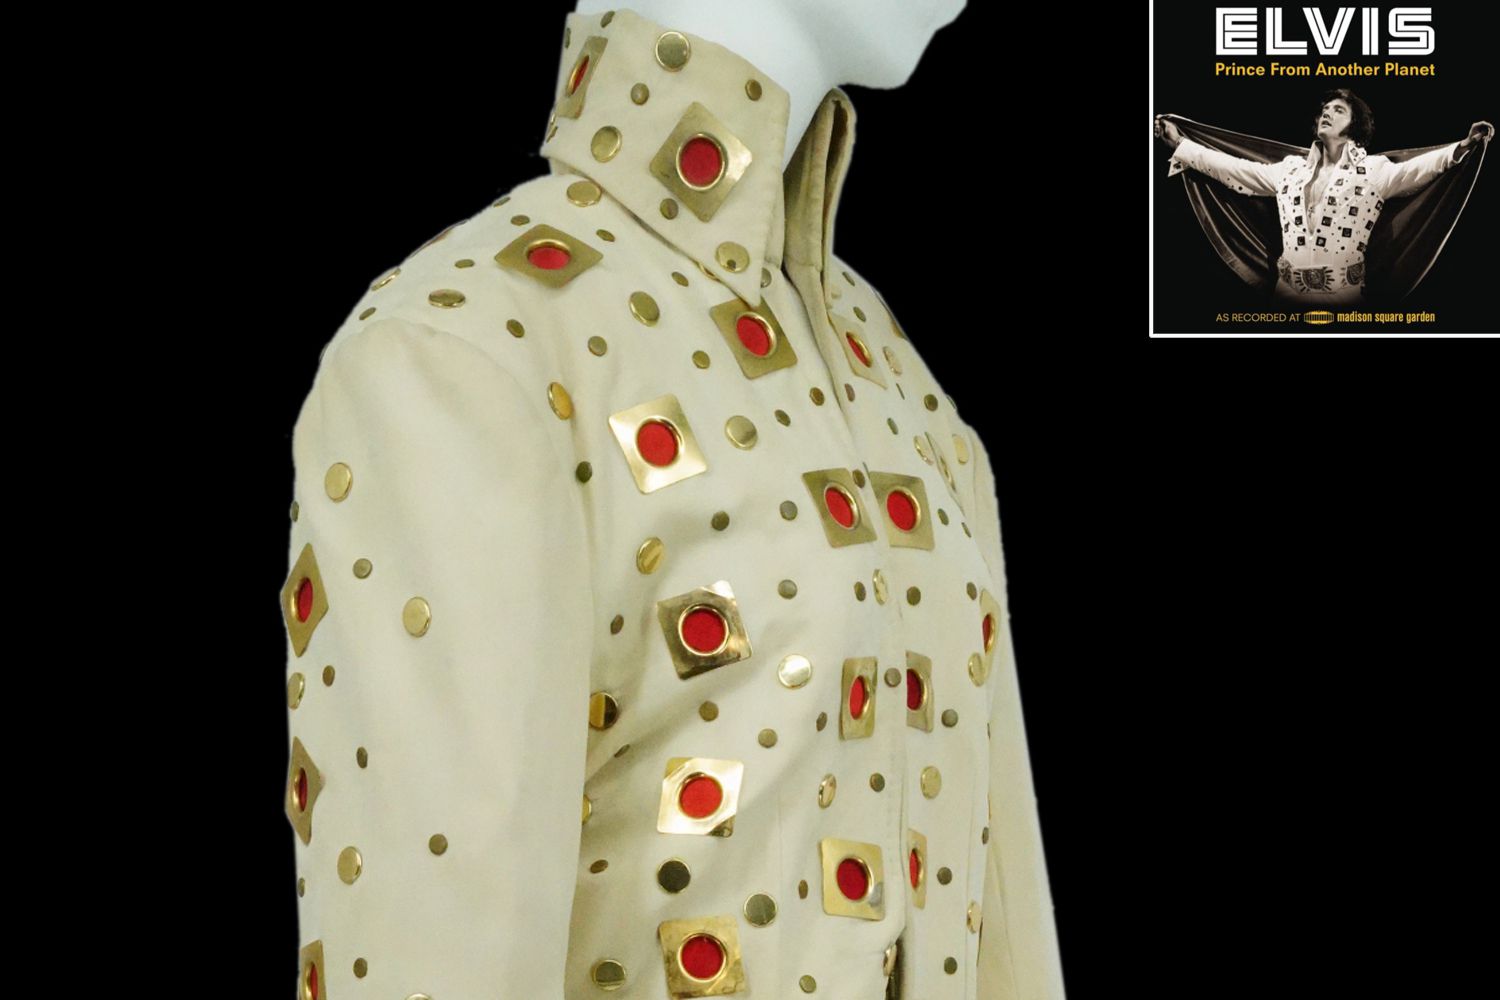 Elvis Presley's iconic jumpsuit and cape he wore in a string of concerts at Madison Square Garden in 1972